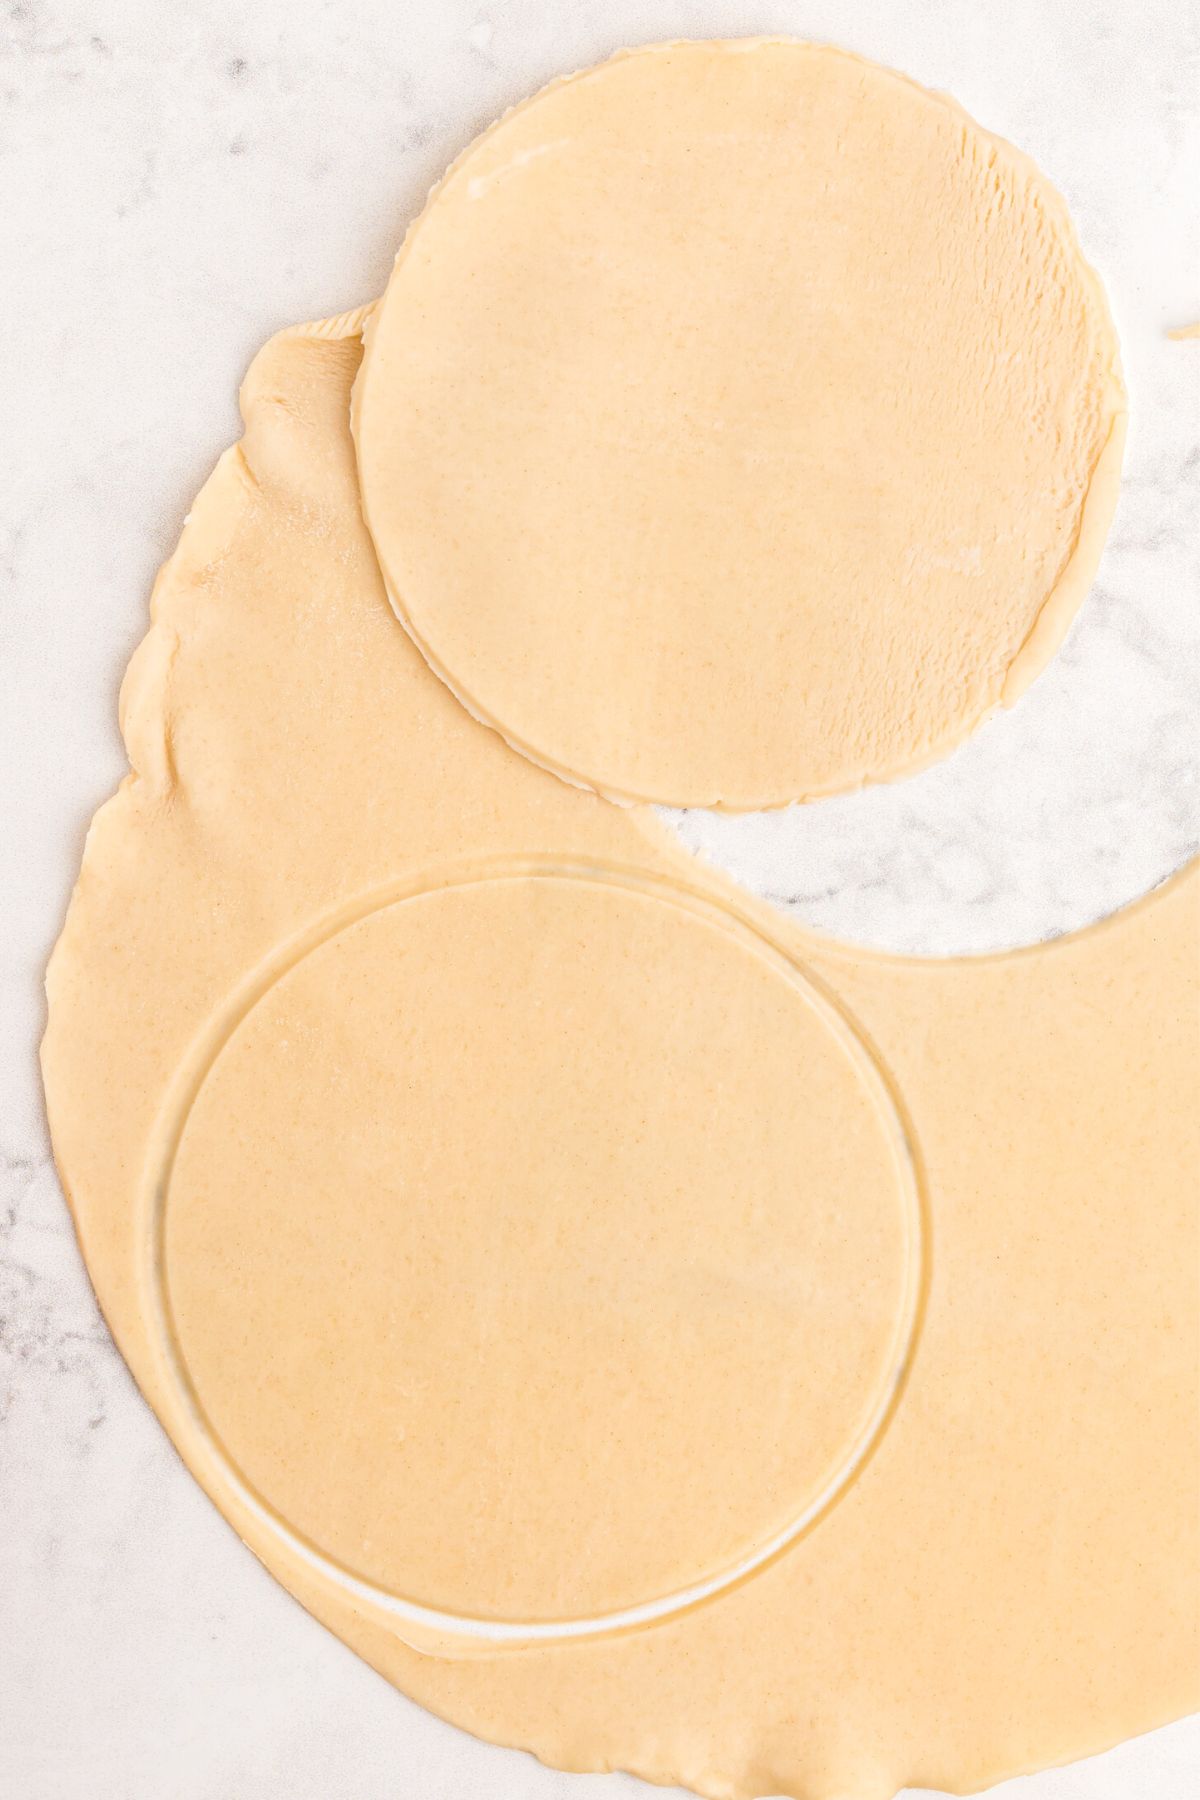 Rolled out pastry dough cut into small circles